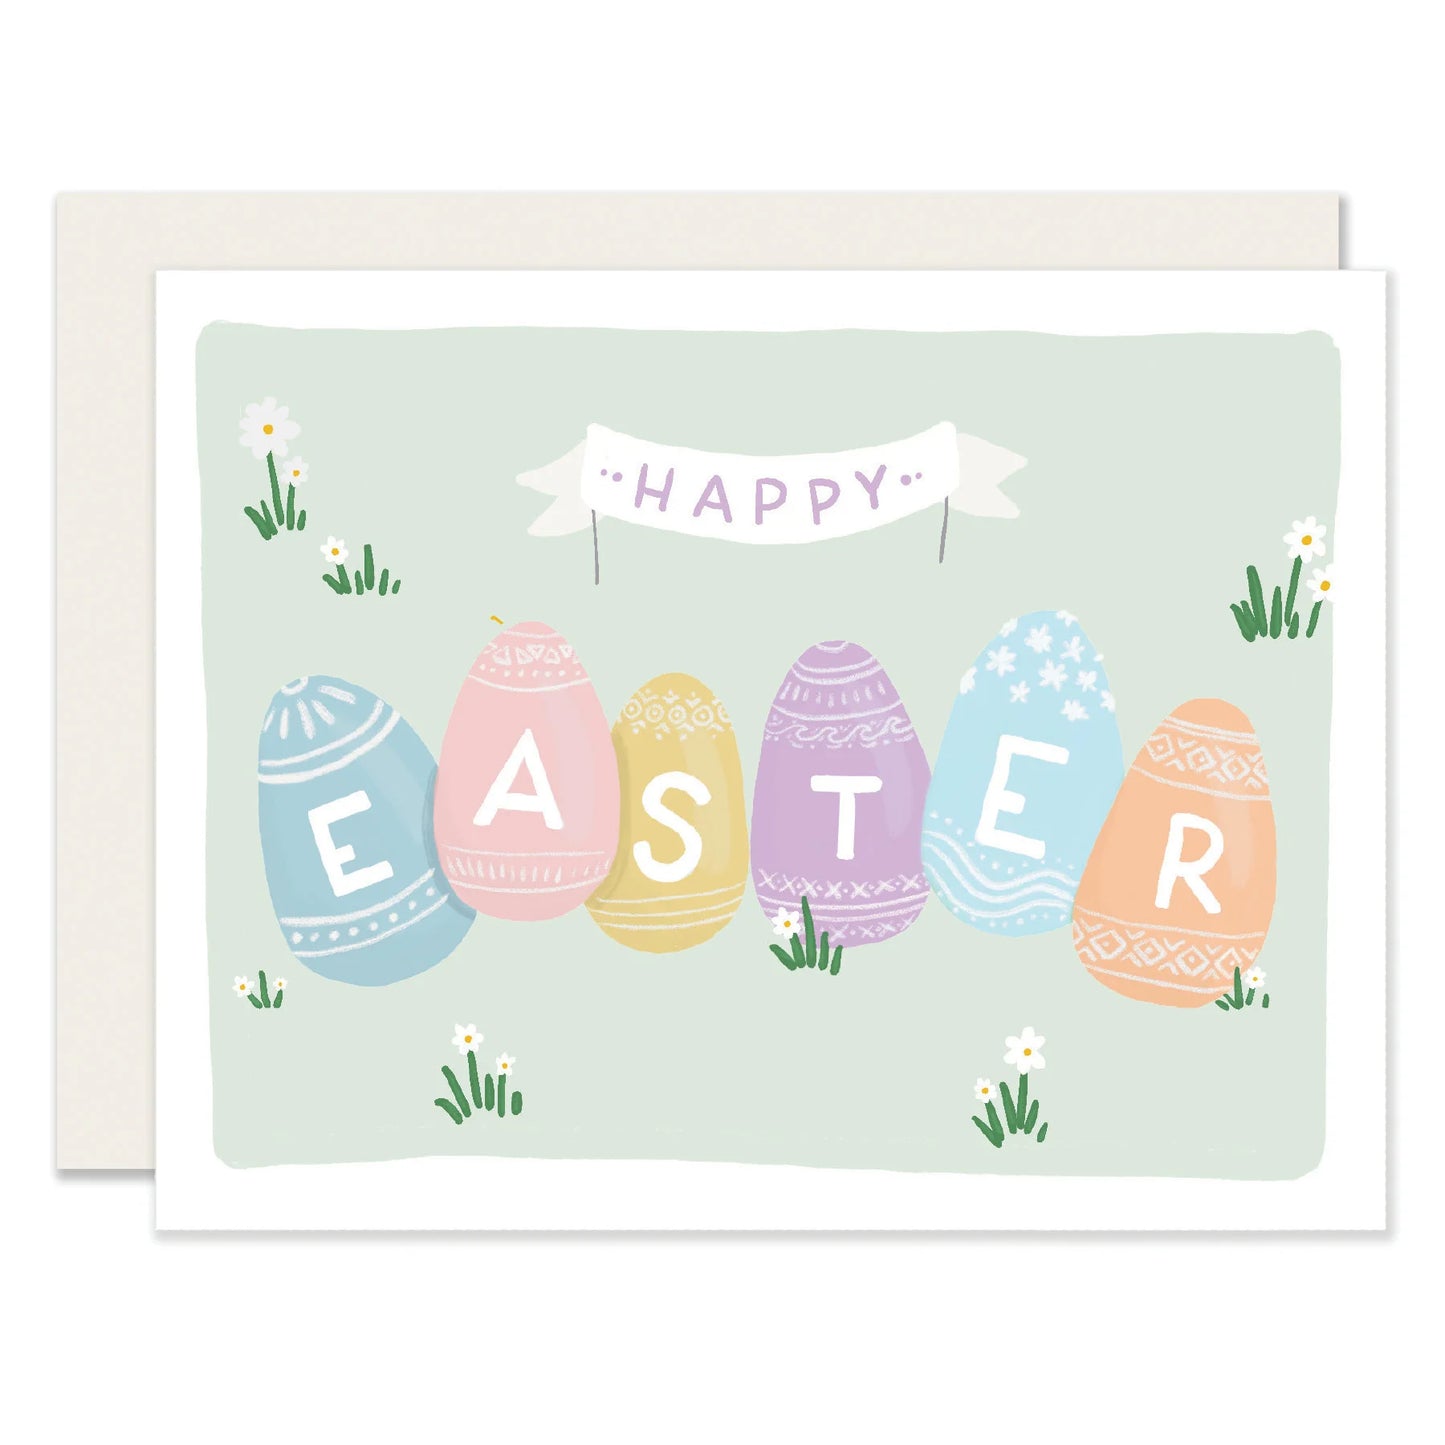 HAPPY EASTER GREETING CARD